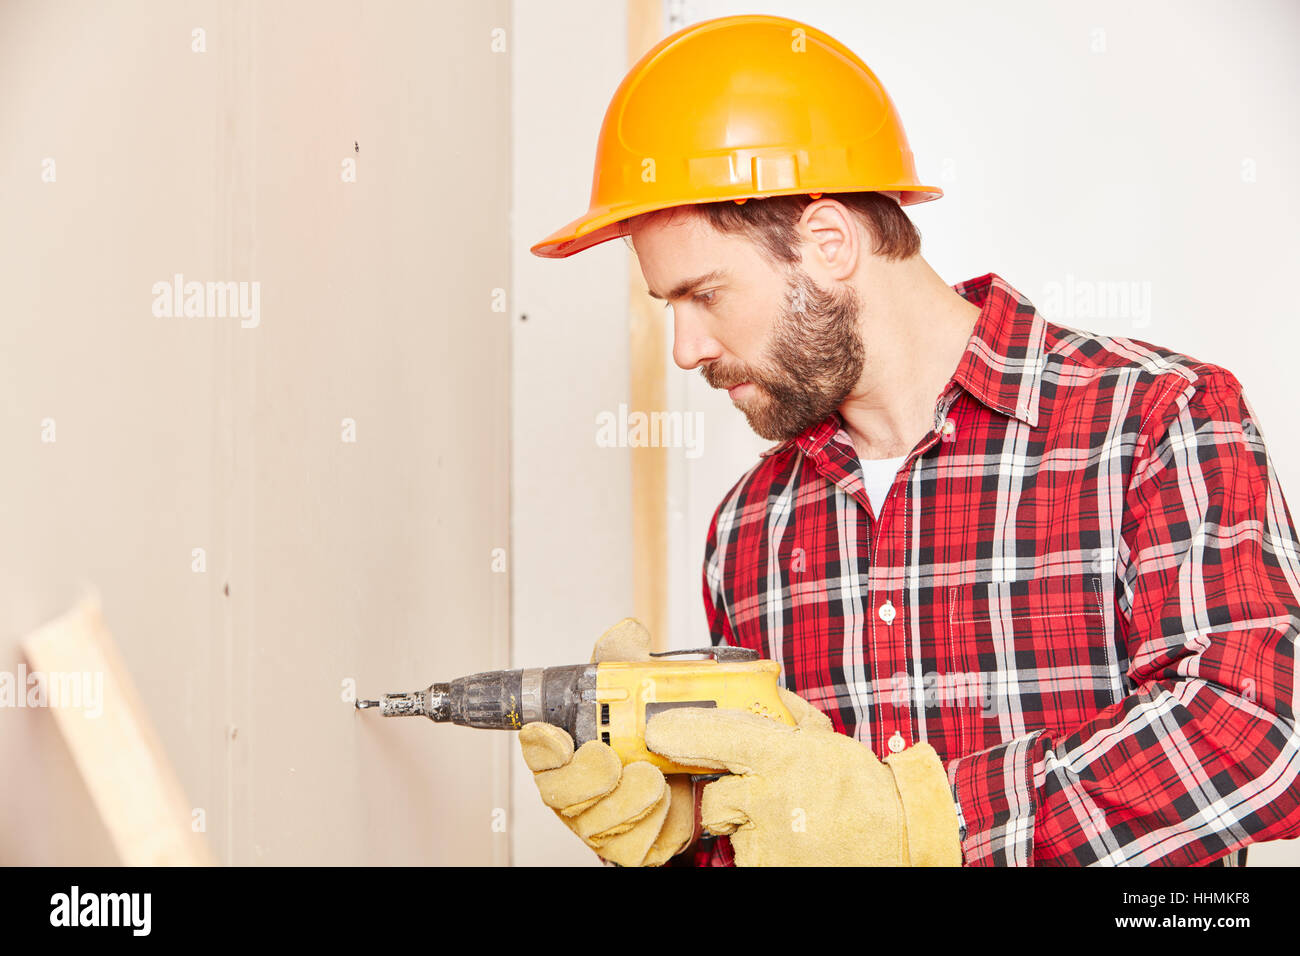 Skilled worker drilling during renovation at building Stock Photo